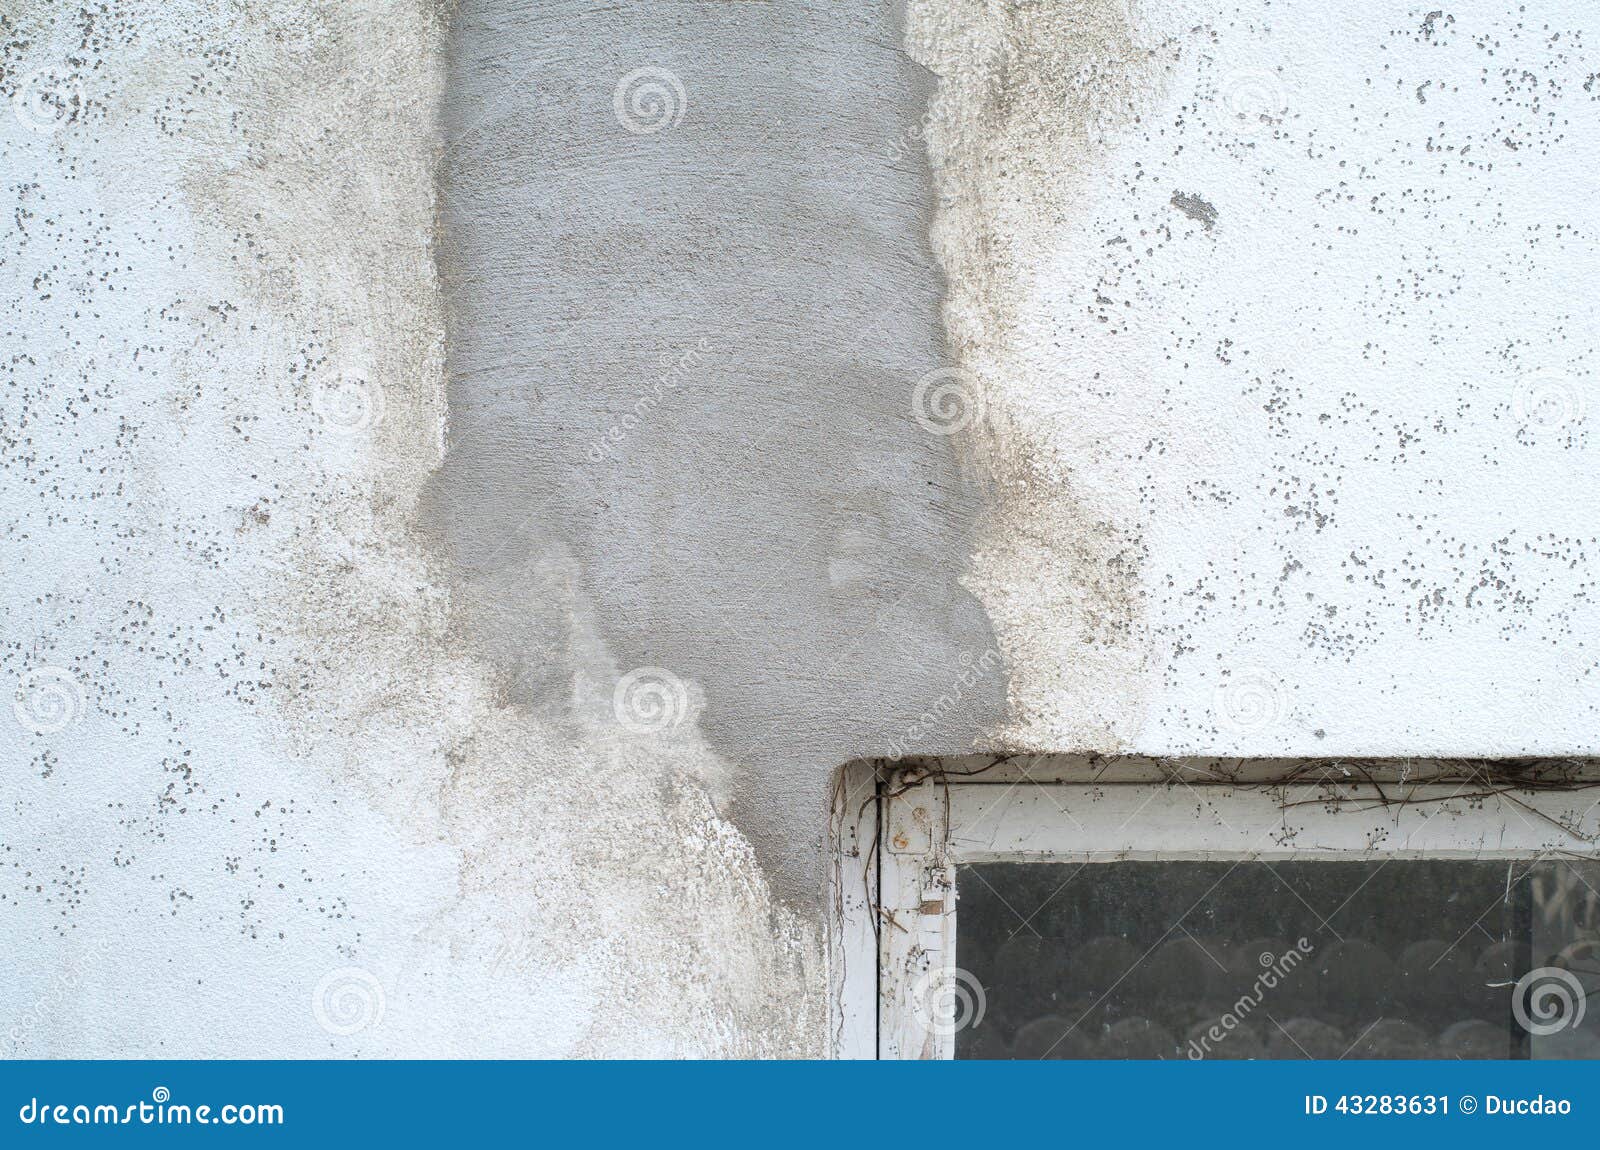 Cement Wall Stock Photo - Image: 43283631